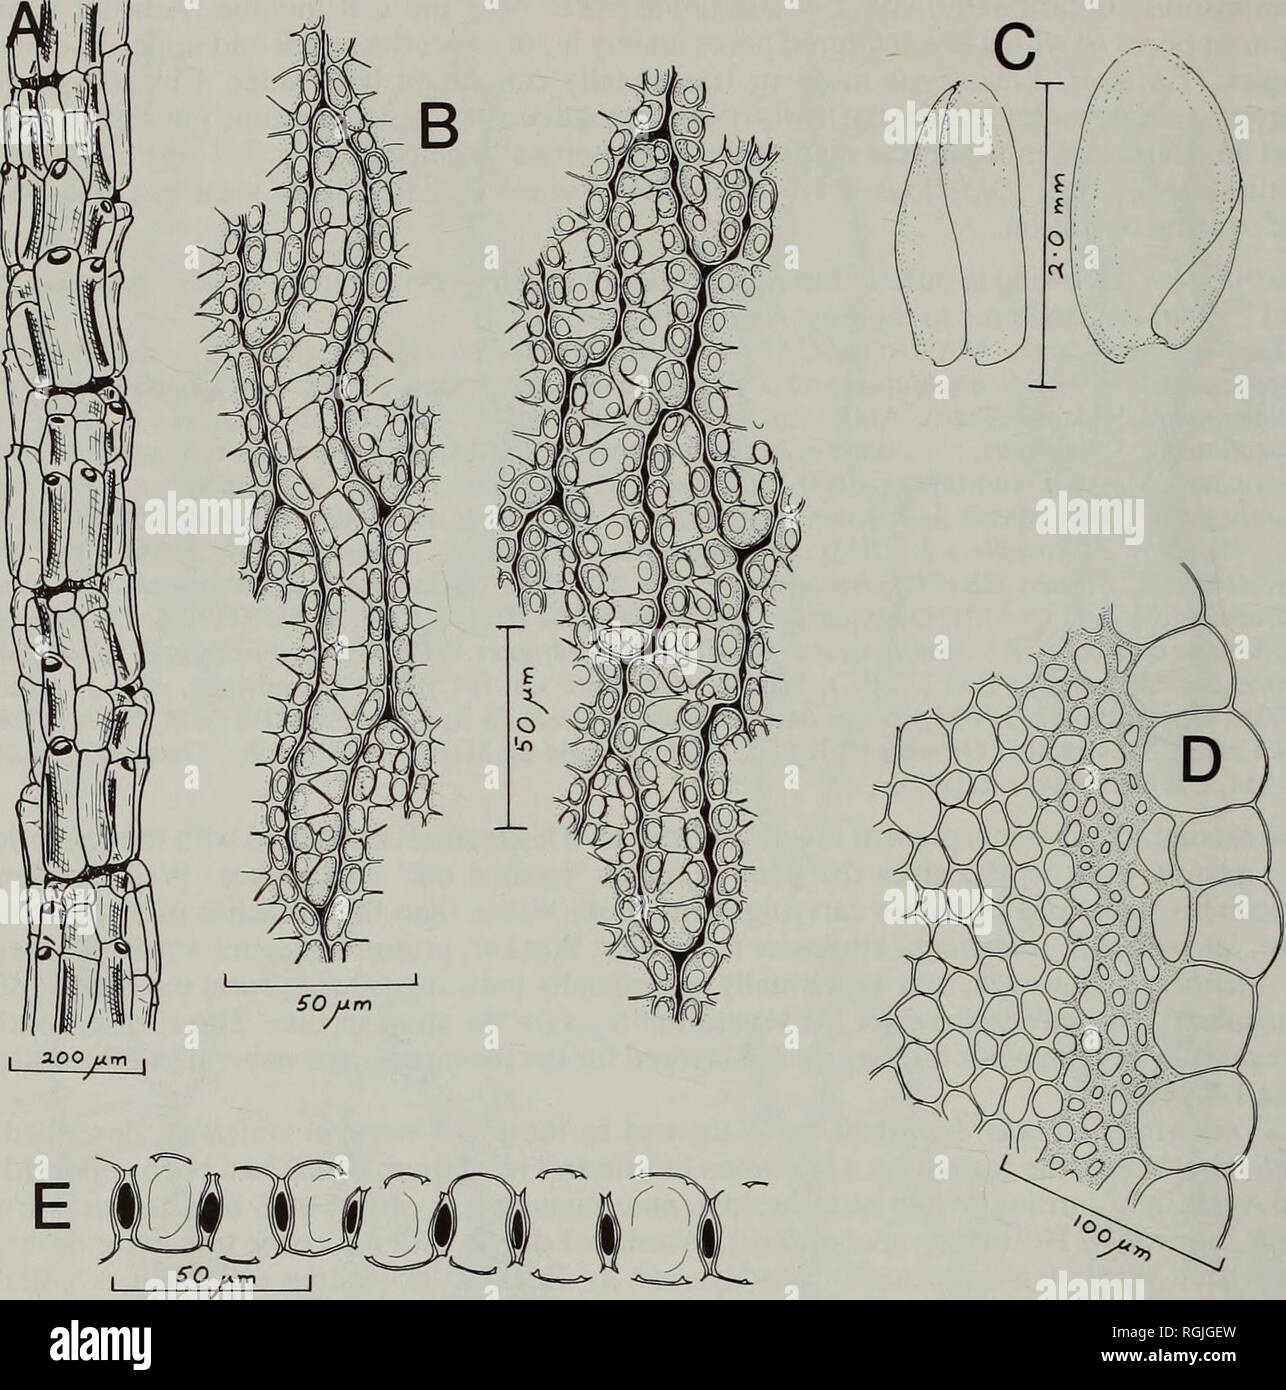 . Bulletin of the British Museum (Natural History) Botany. 114 ALAN EDDY. Fig. 20 Sphagnum africanum Welw. &amp; Duby. A, branch cortex; B, adaxial (left) and abaxial (right) surfaces of branch leaf; C, branch leaves; D, transverse section of stem; E, transverse section of leaf (all drawn from the type). not at all dimorphic. Stems generally rather weak, 0-3-0-6 mm diameter. Cortex mainly 1-layered but with a marked tendency towards local duplication and up to 50 per cent 2-layered, exposed cell walls without pores. Internal cylinder varying from pale yellow-brown to deep red-brown. Branch cor Stock Photo